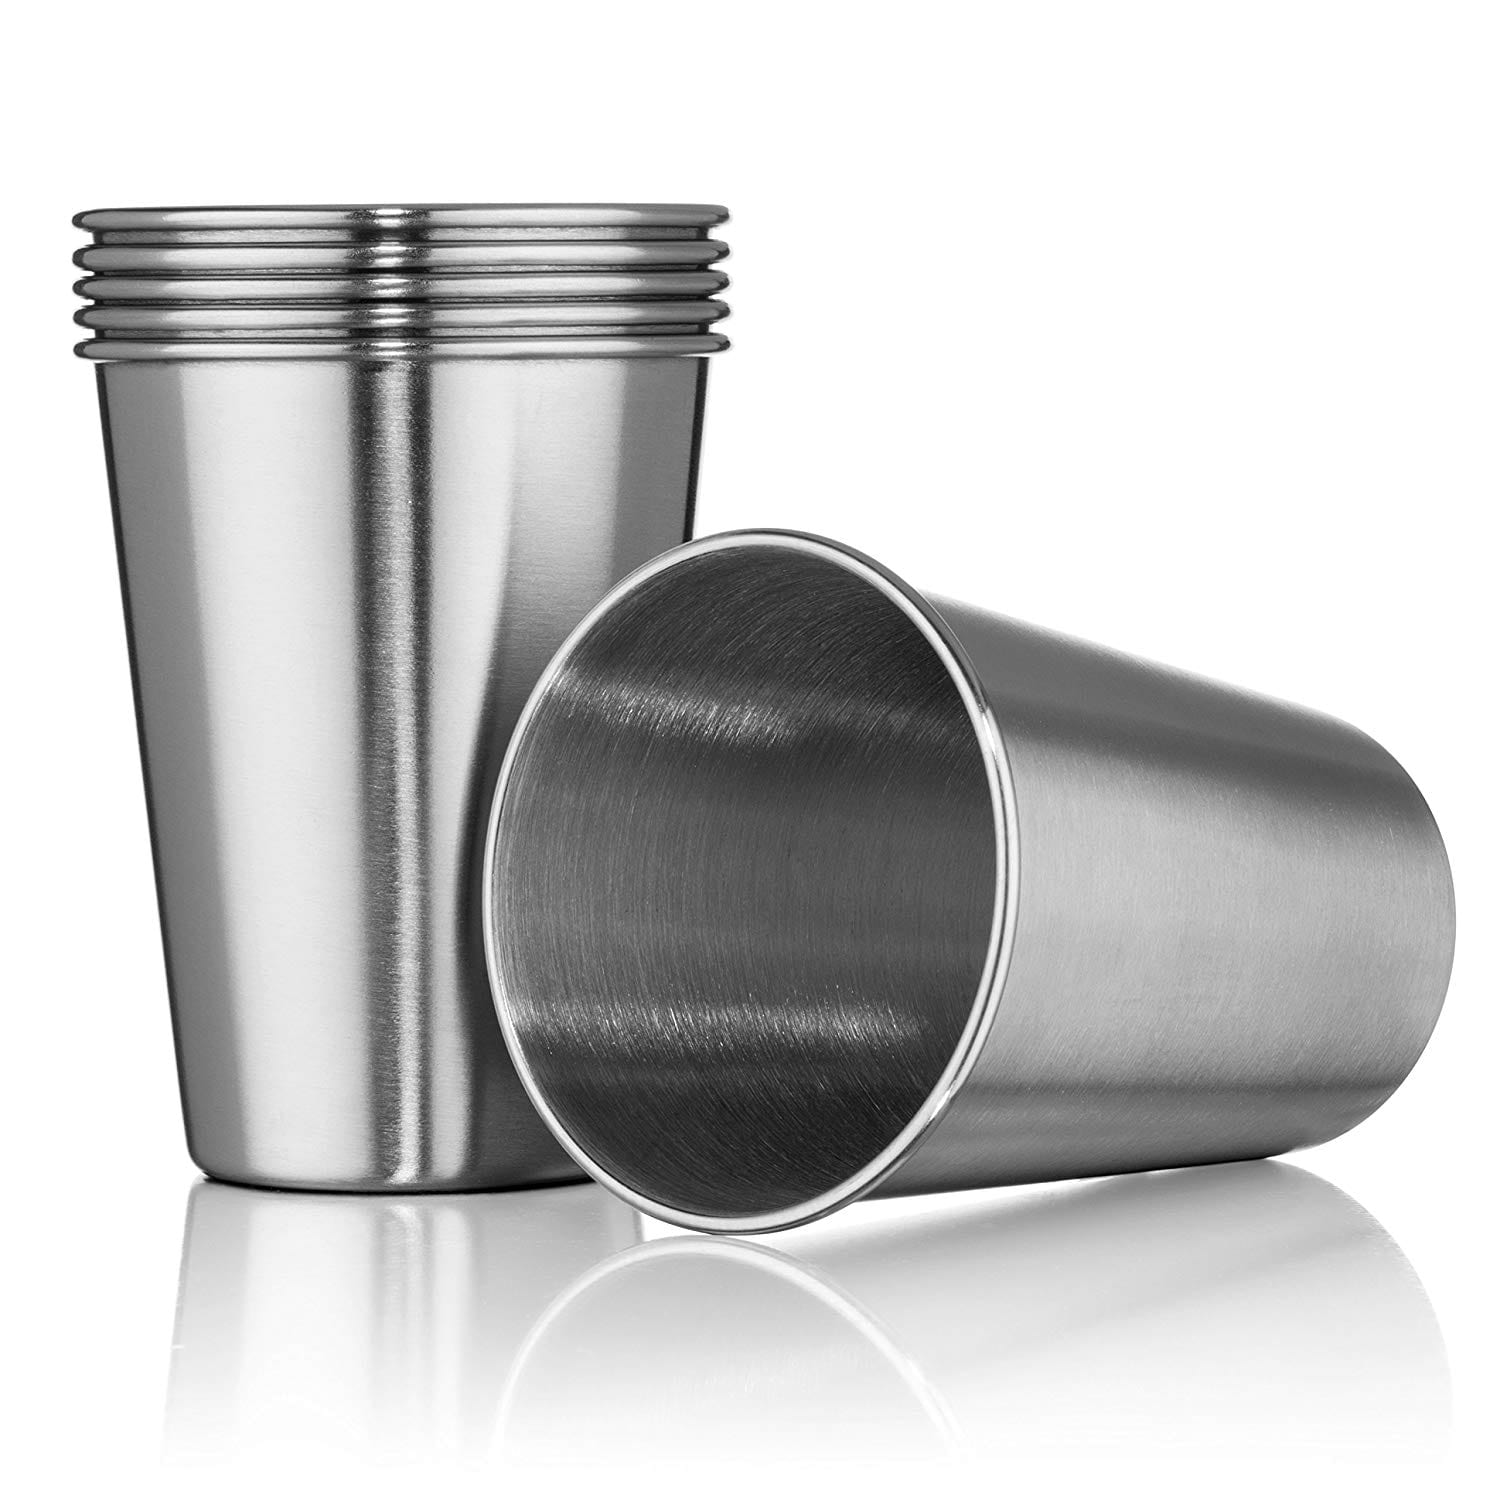 BarConic Metal Cup - Stainless Steel - 12oz